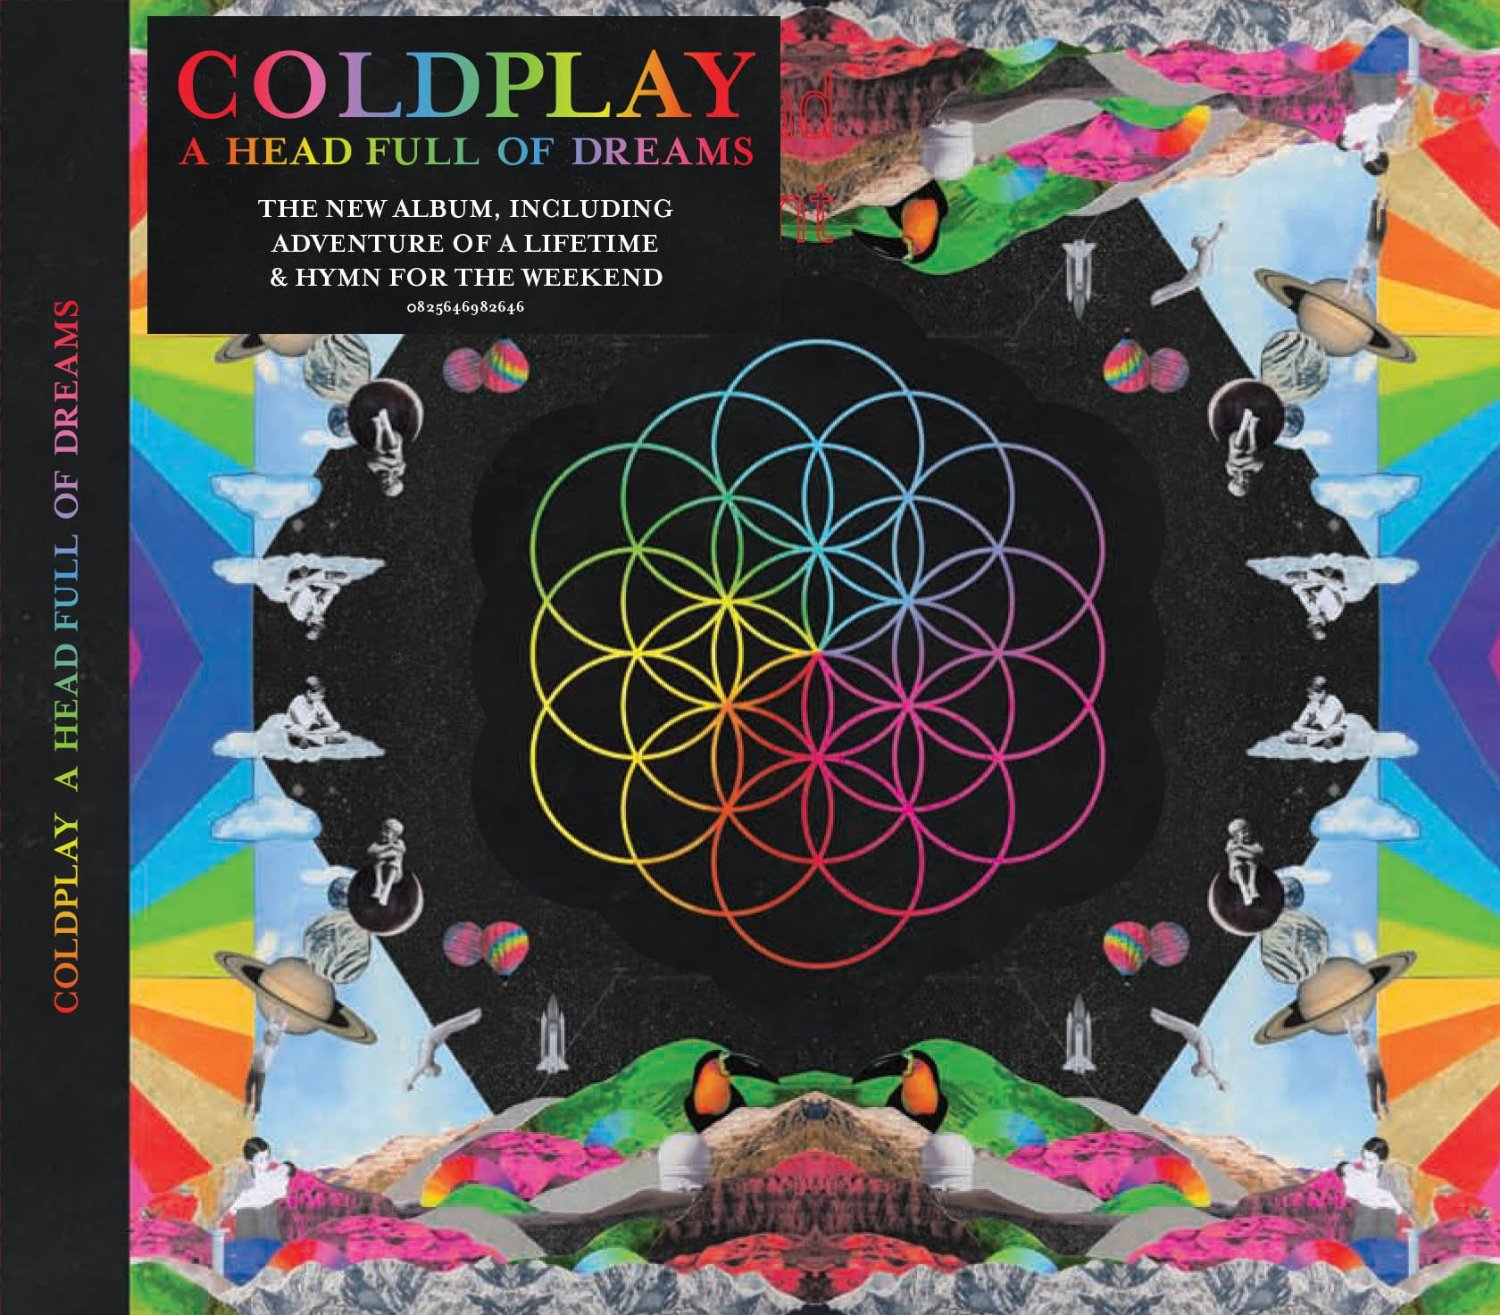 coldplay band albums